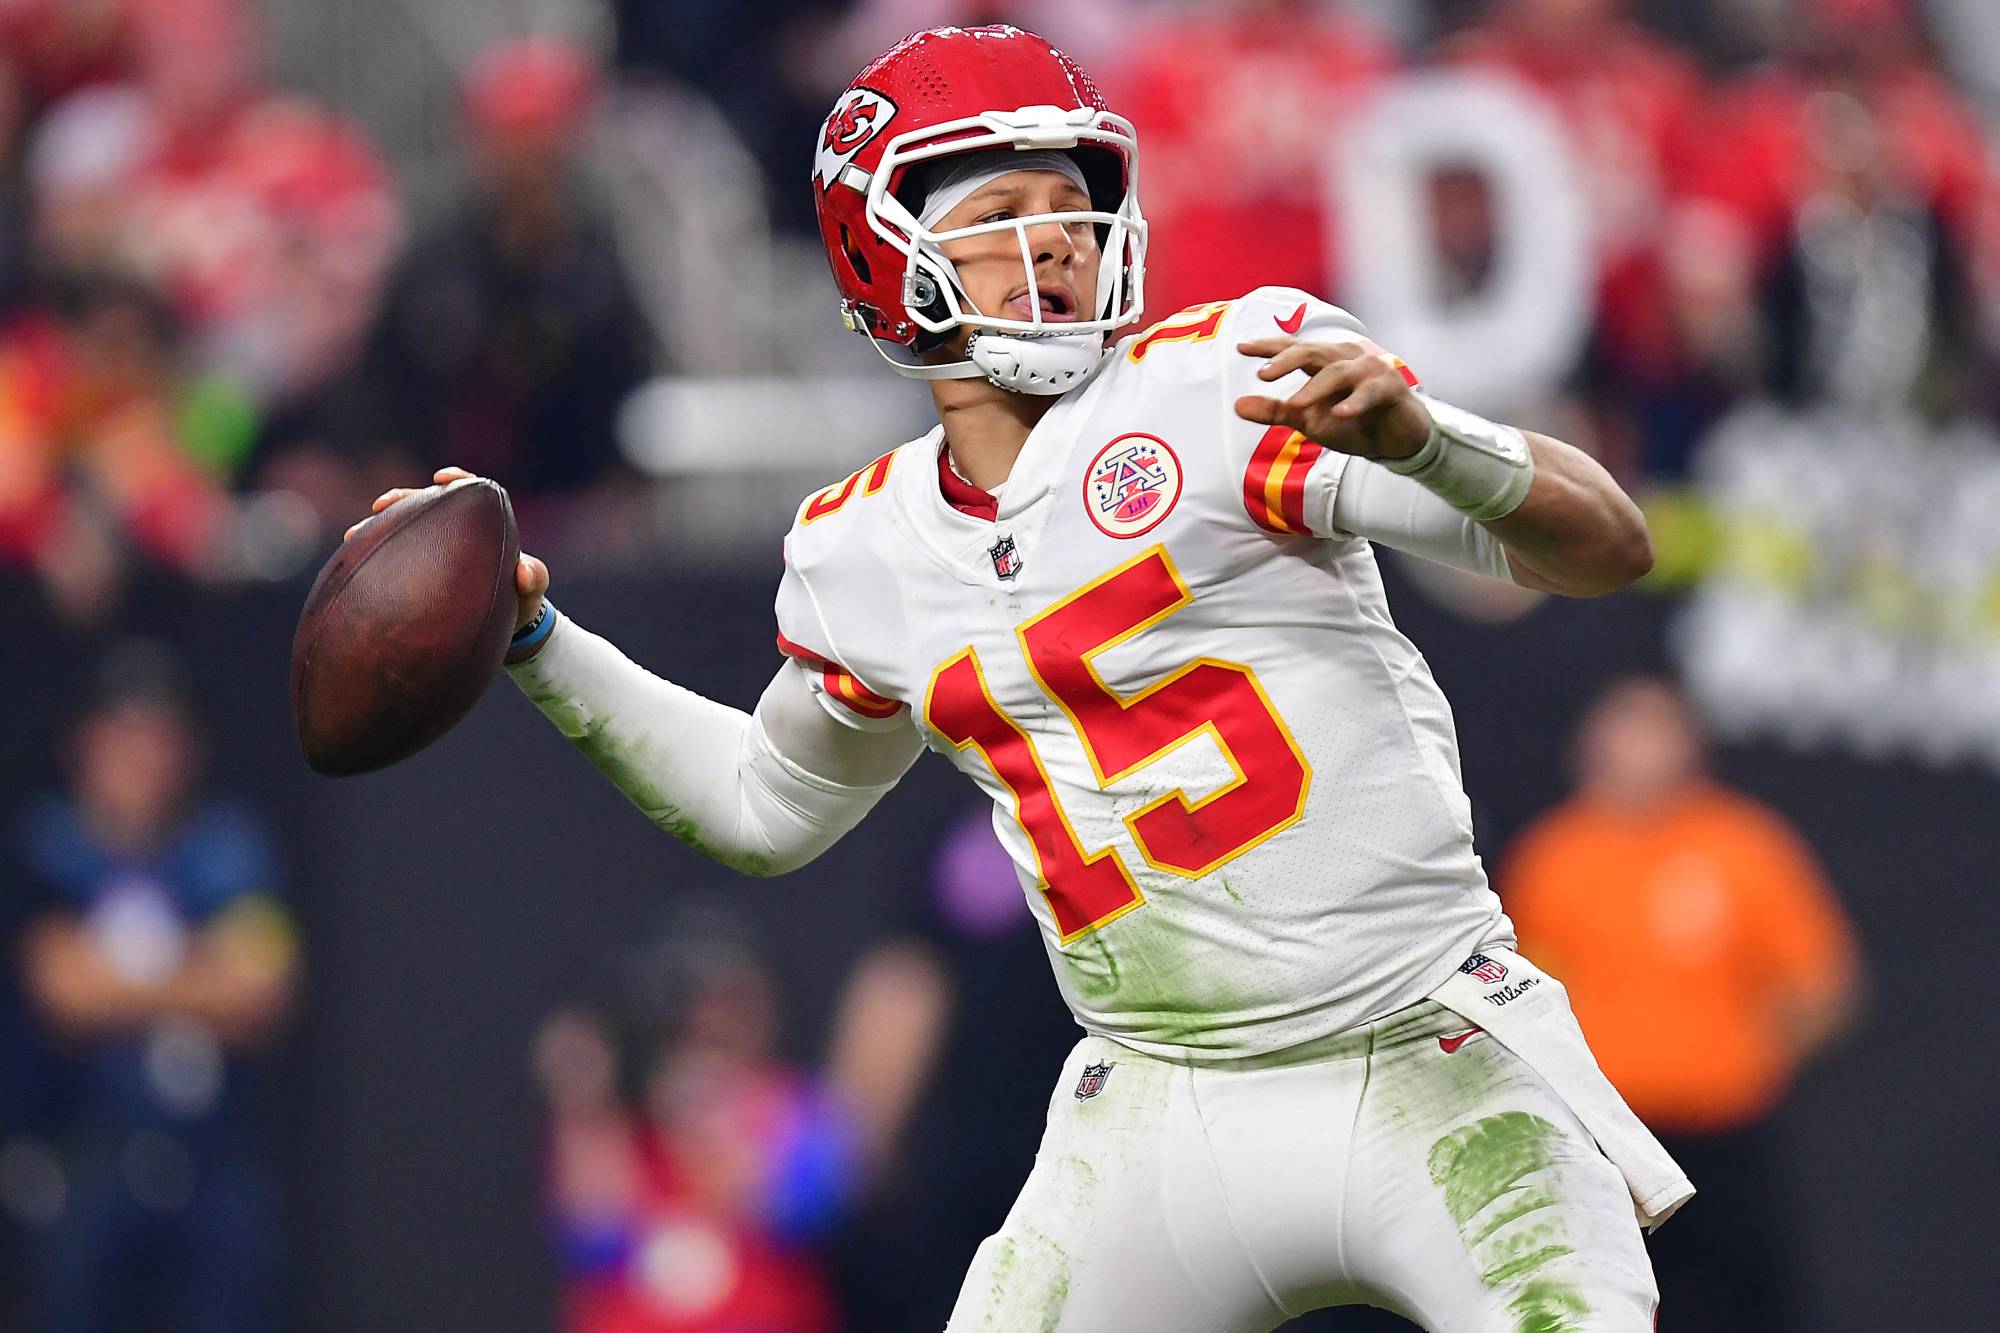 Chiefs quarterback Patrick Mahomes throws against the Raiders during the second half at Allegiant Stadium in Las Vegas on Saturday. | USA TODAY / VIA REUTERS